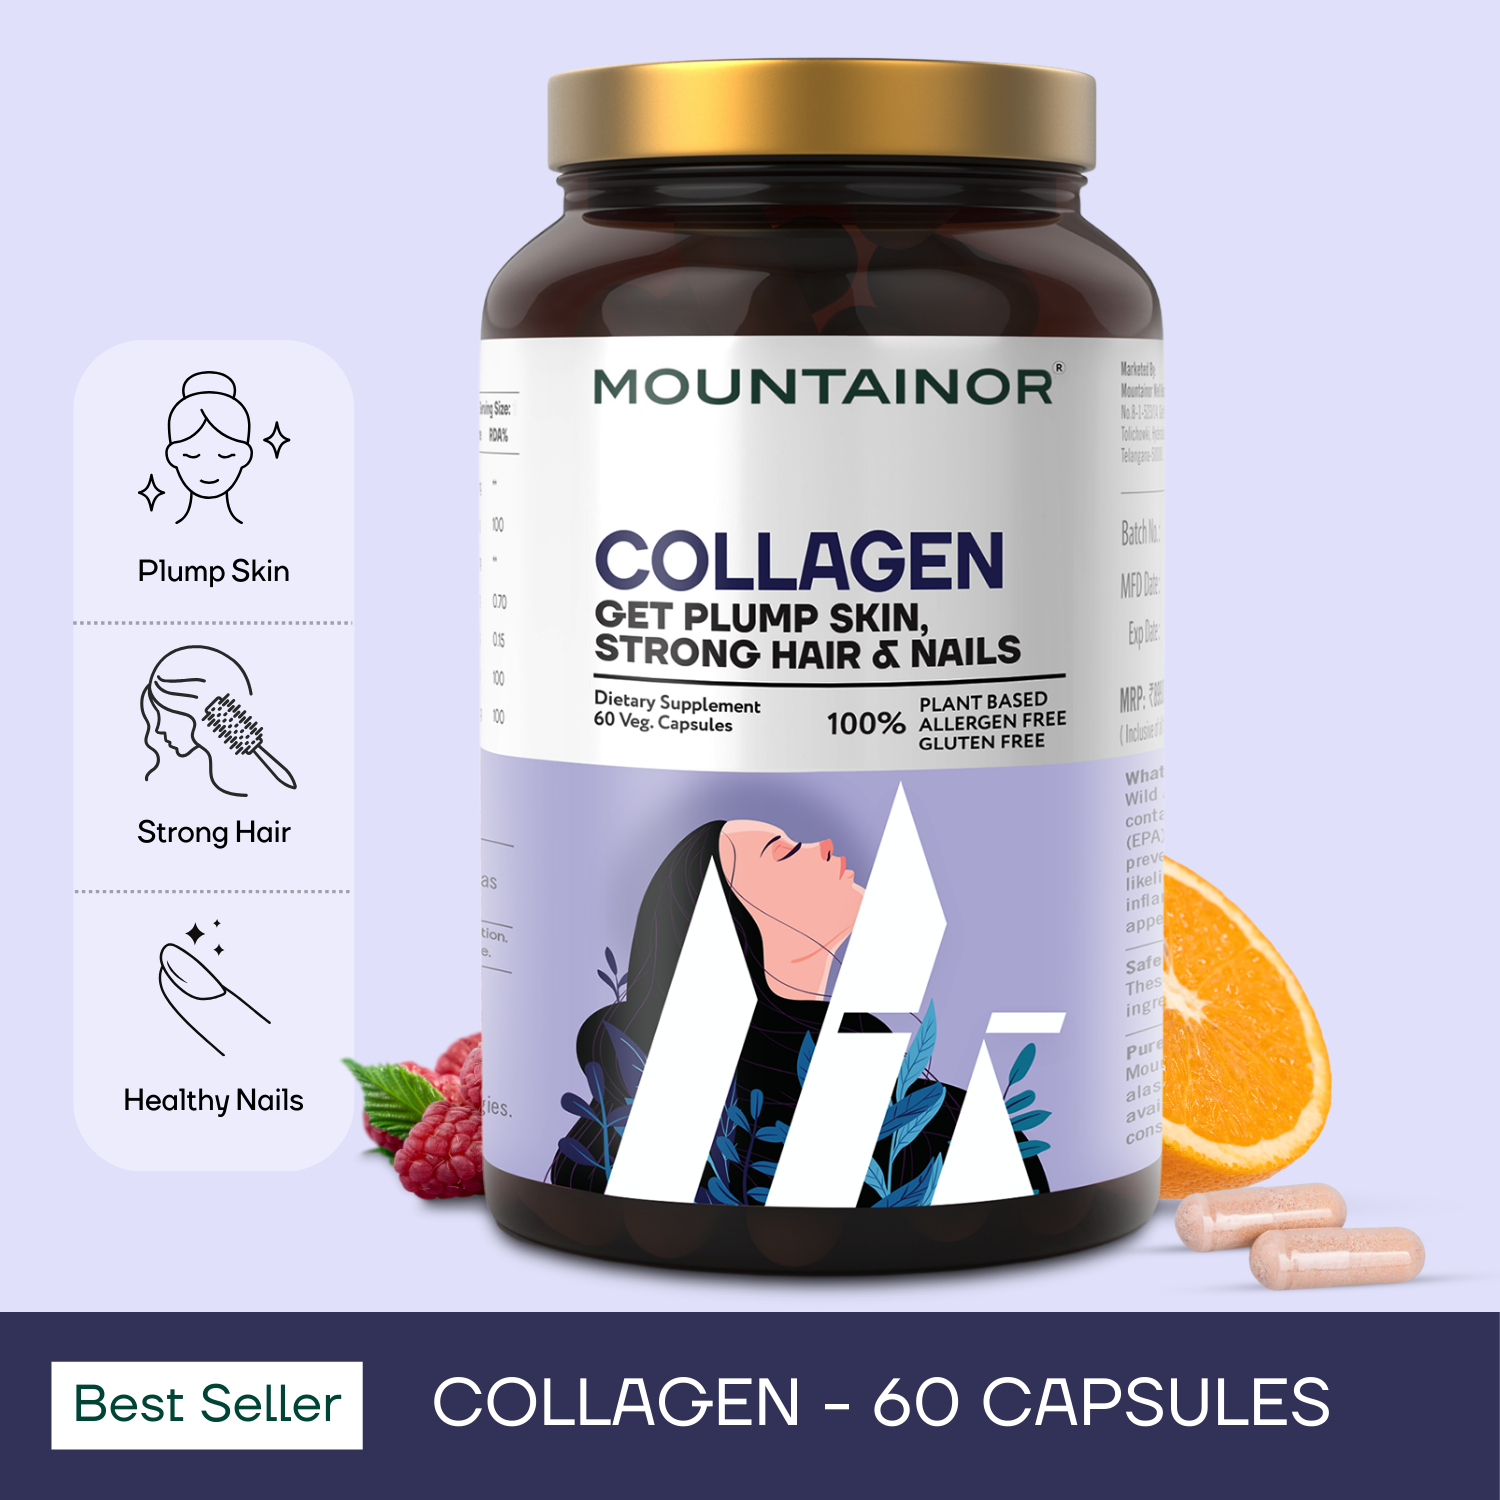 Collagen 60 Capsules for Youthfull Skin | Buy 1 Get 1 Free